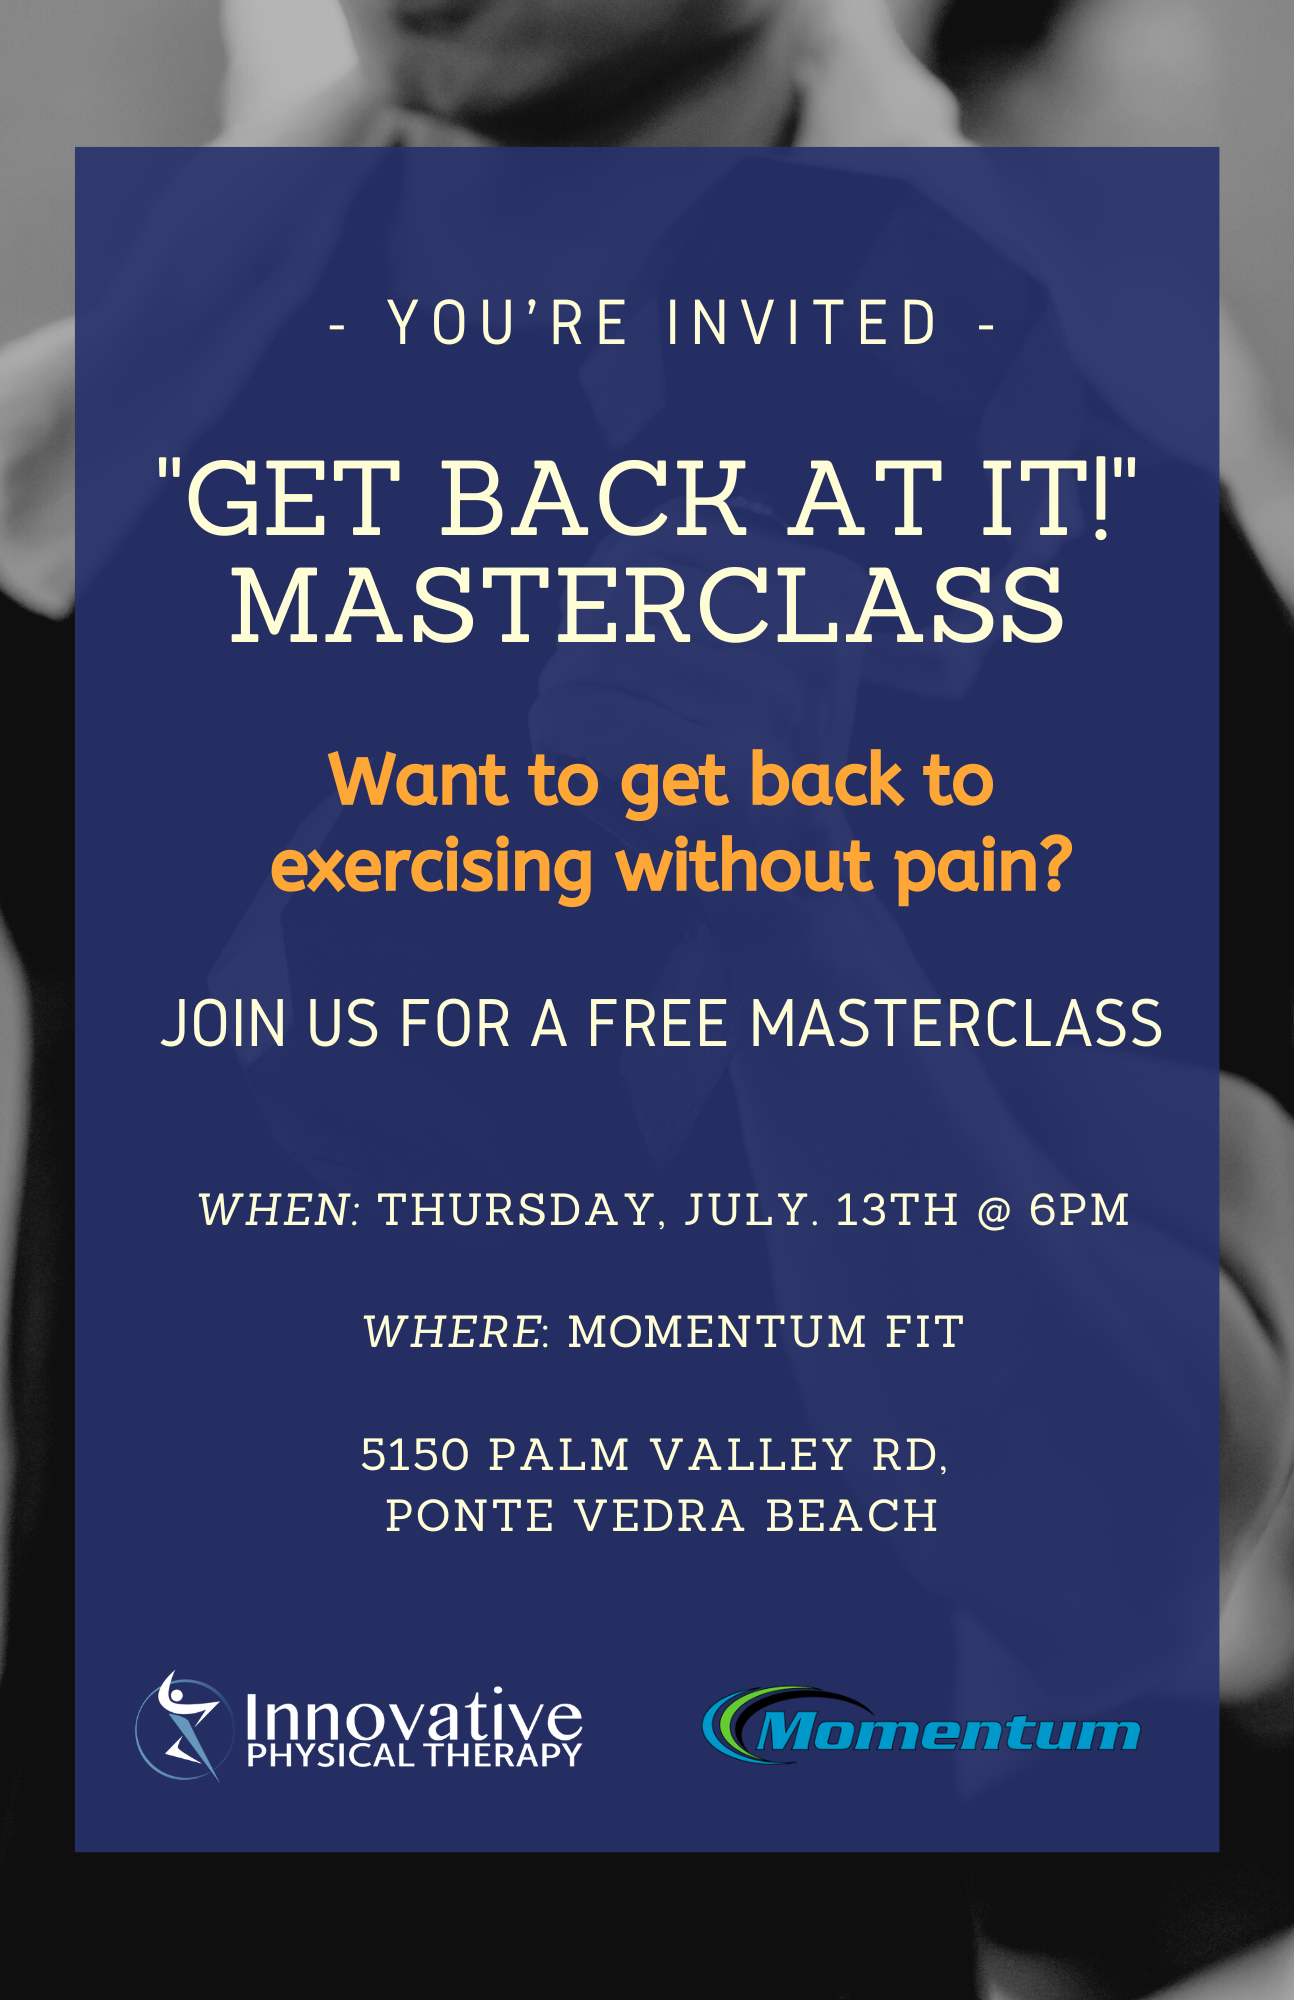 Masterclass: Get Back at it - Innovative Physical Therapy